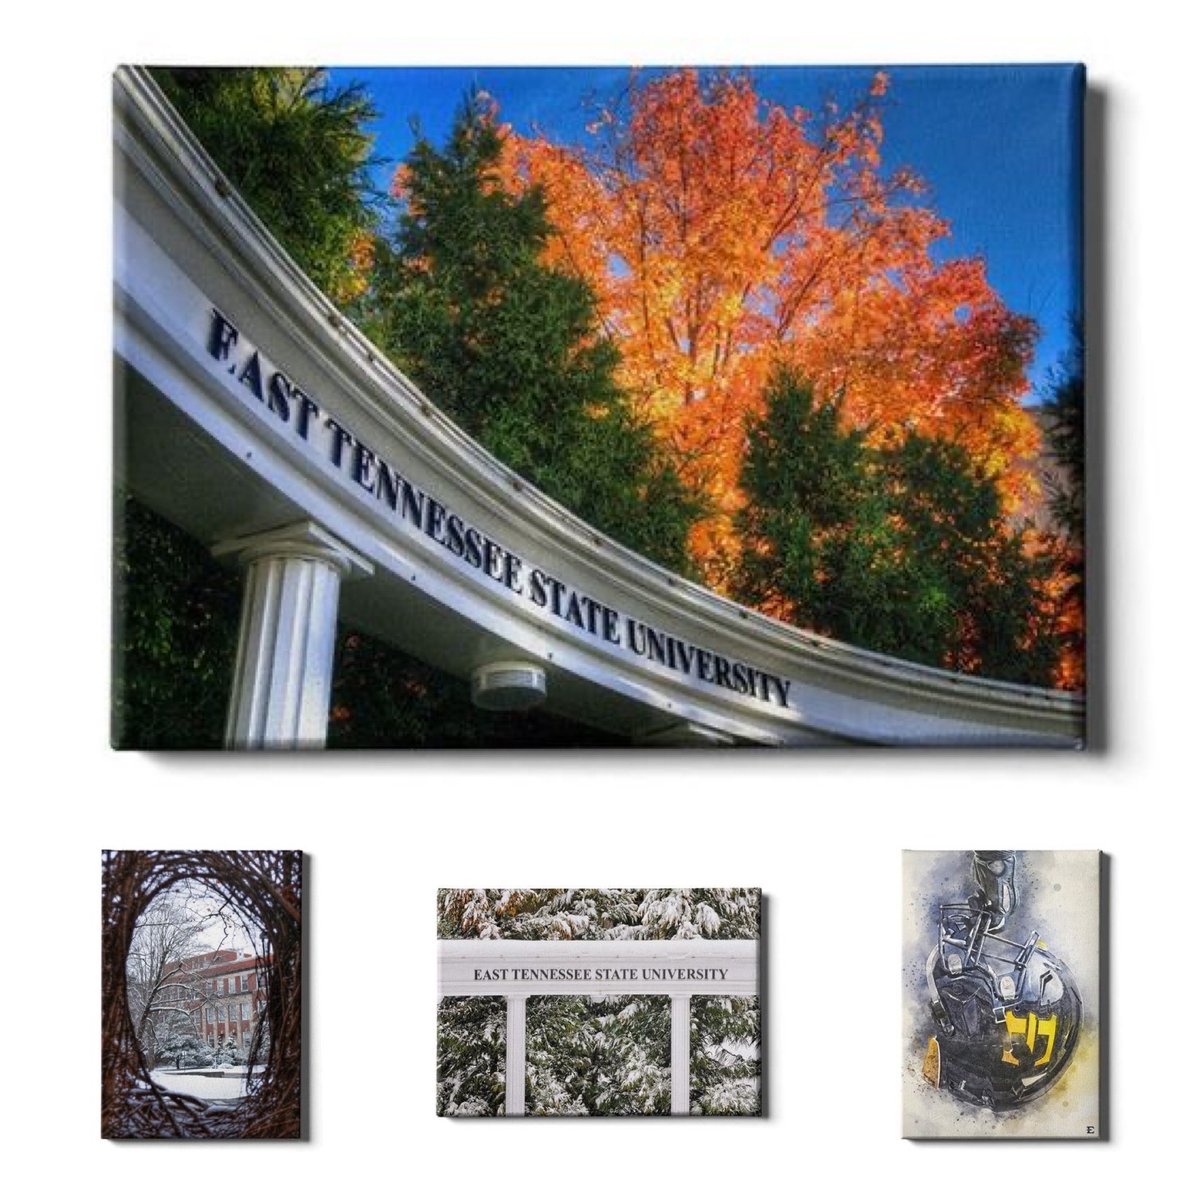 Four Epic images of East Tennessee State University. See more Epic images at collegewallart.com.